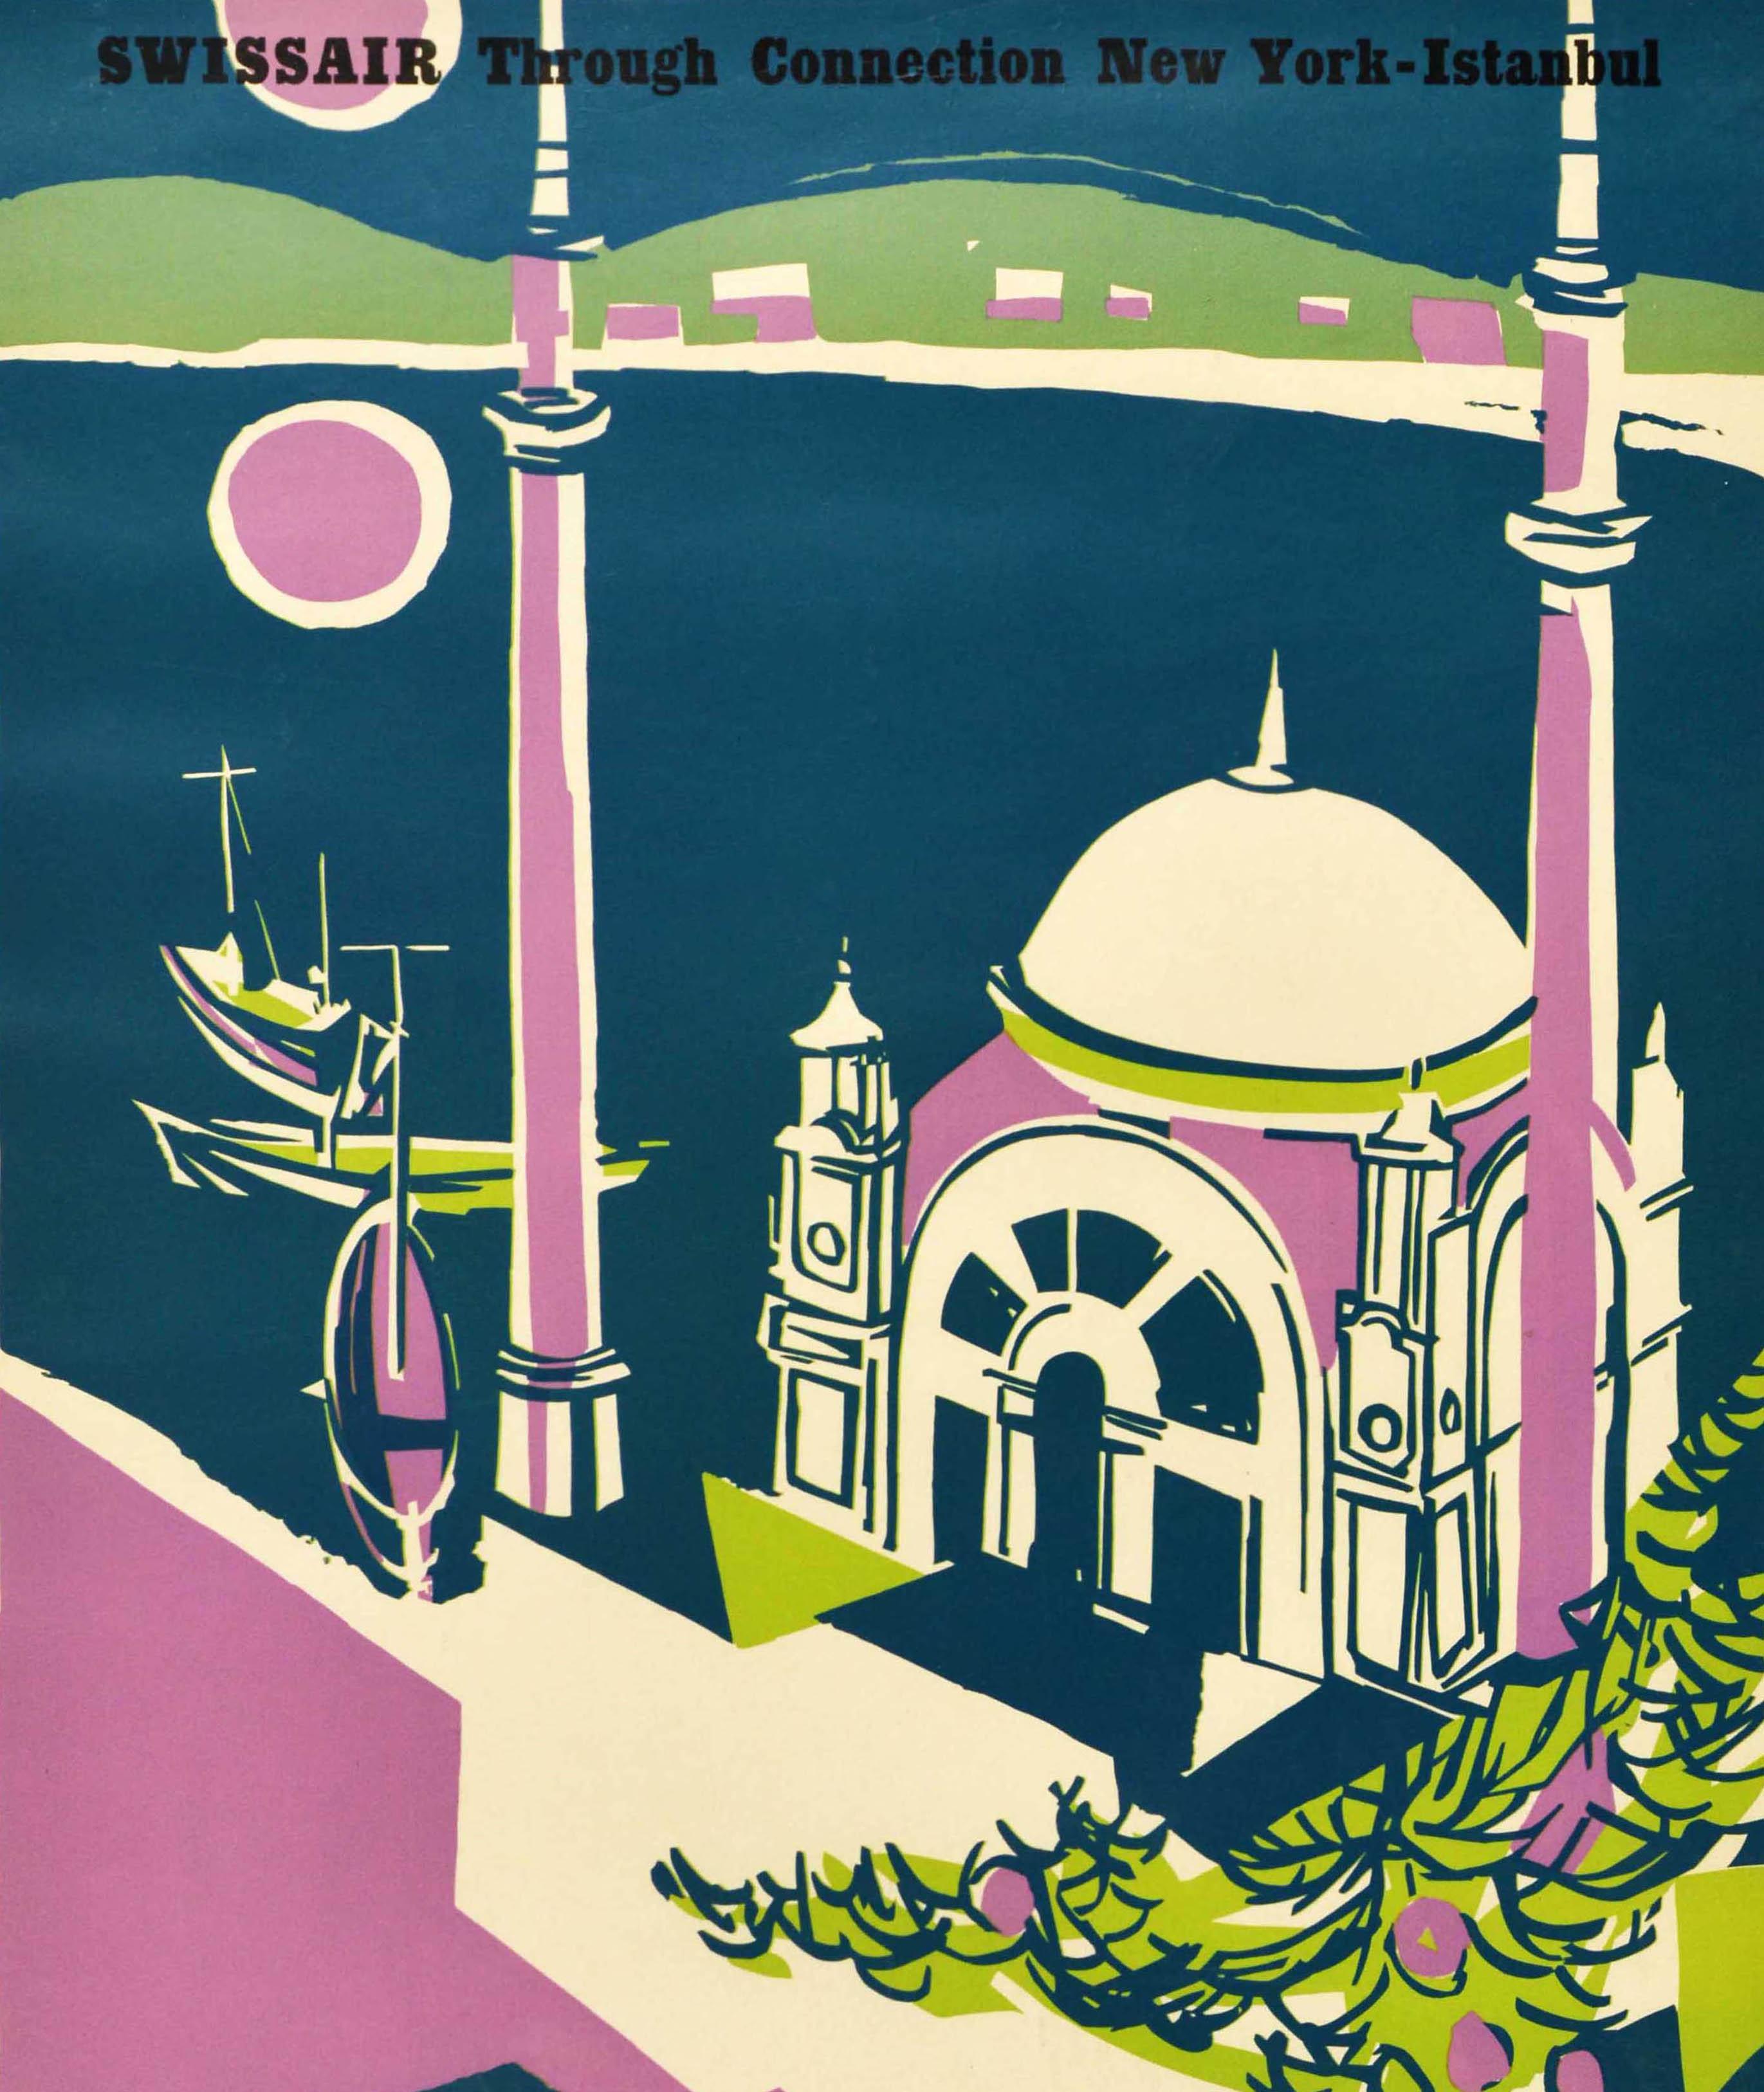 Original vintage Swissair travel poster for Istanbul Turkey featuring a colourful view by Henri Ott (b 1919) of the historic Ortakoy Mosque by the Bosphorus river with a tree in the foreground, boats on the calm water reflecting the sun and hills on